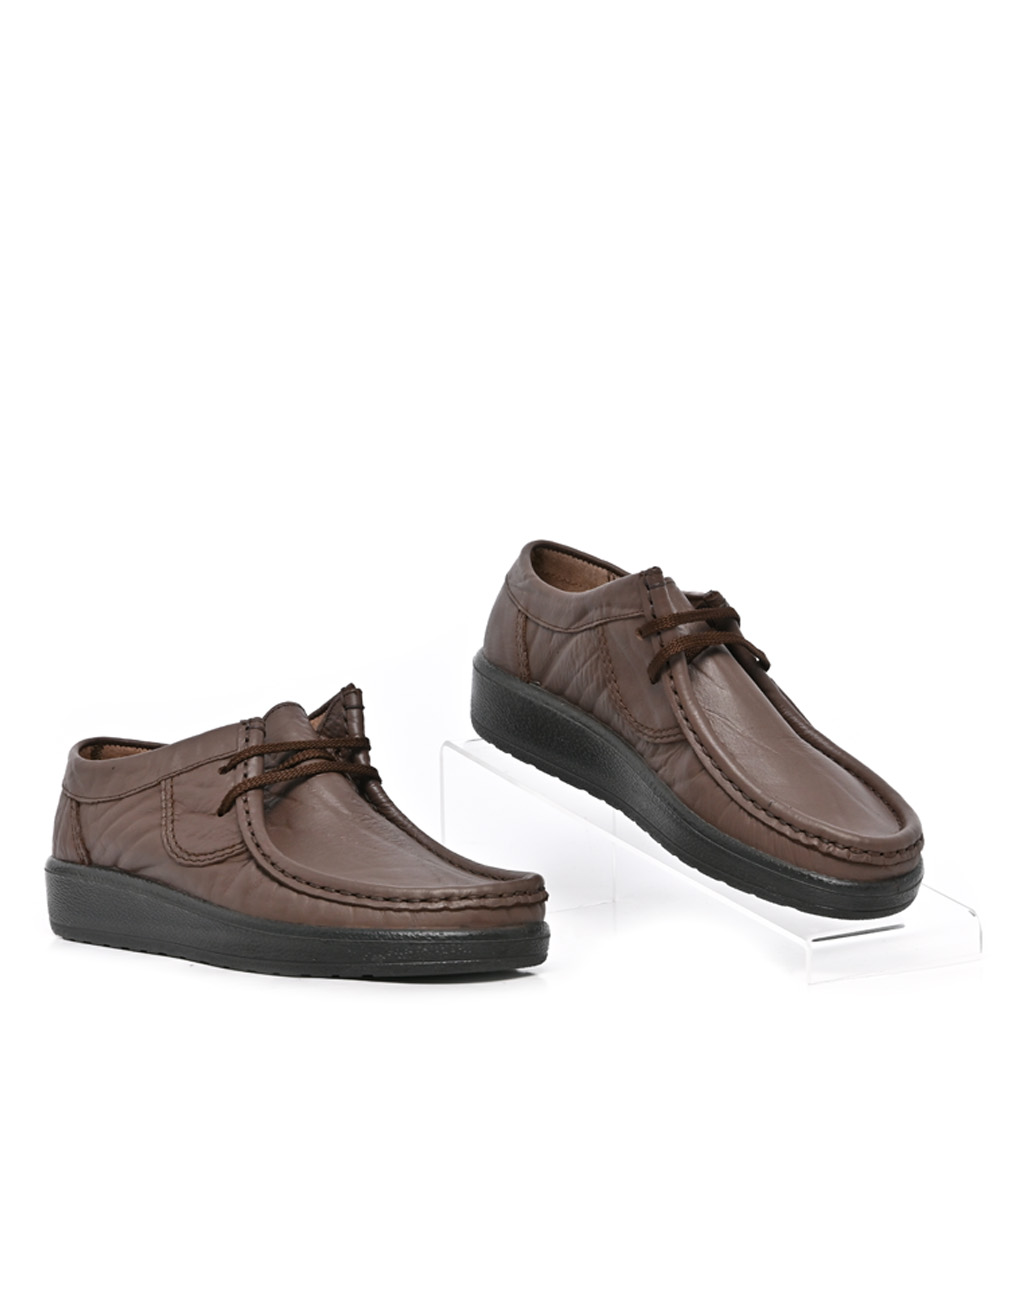 Mens Grasshoppers, Hornsby, Casual Chestnut Moccasins – Bolton Shoes